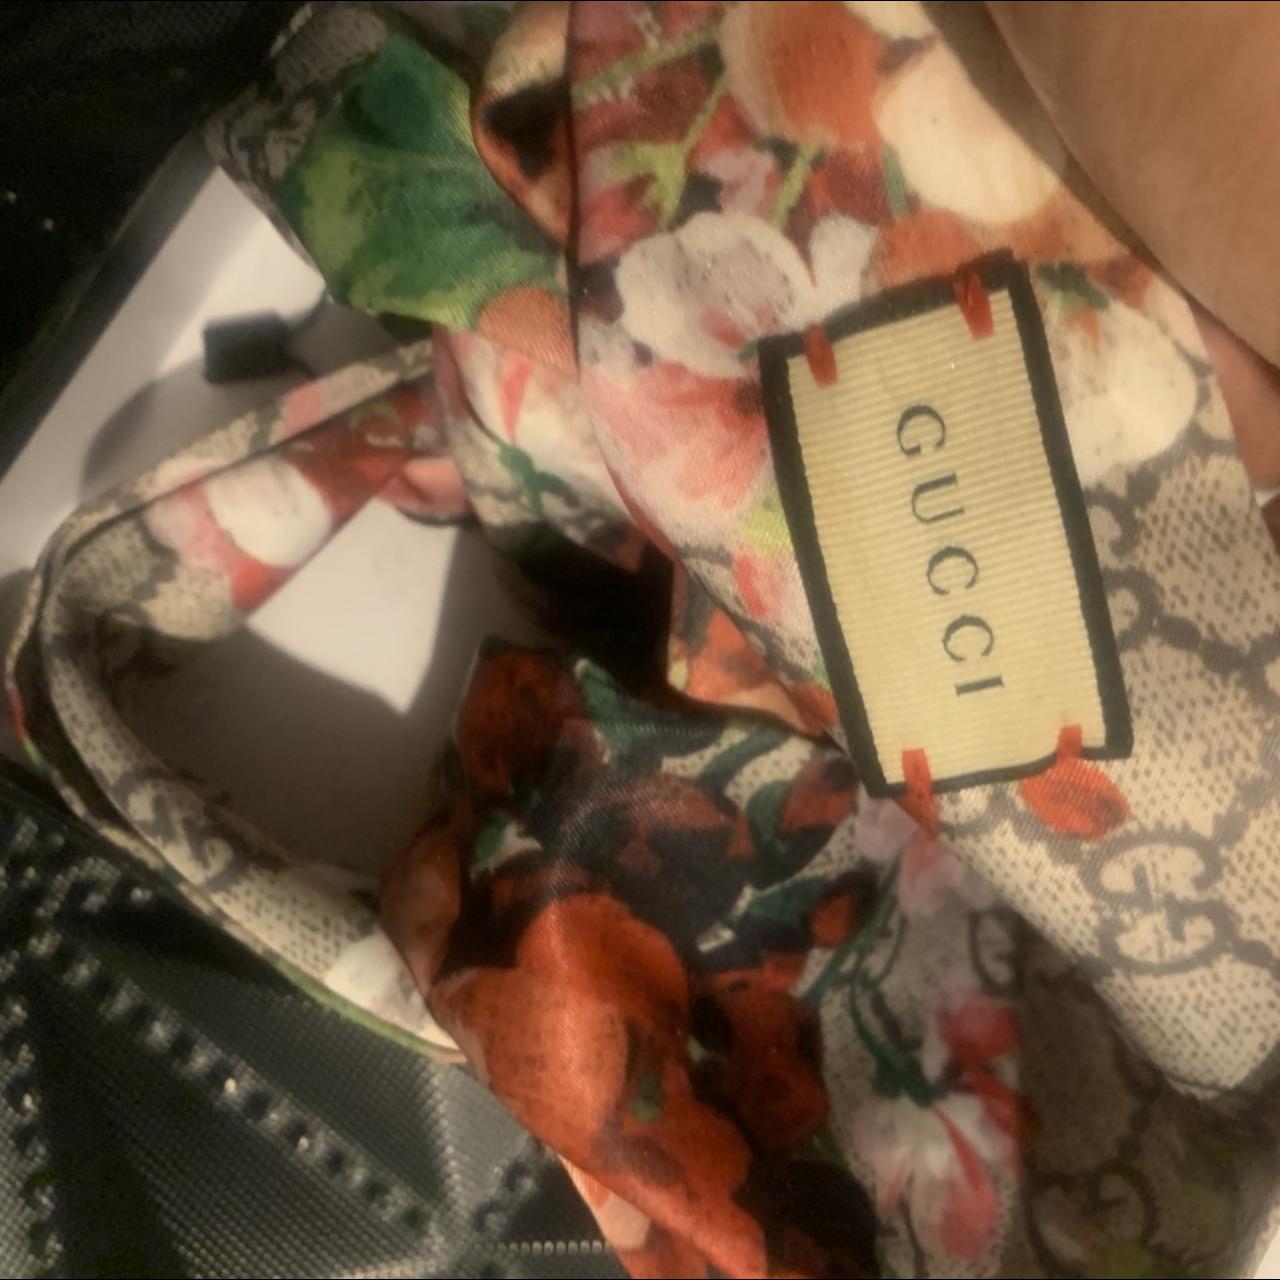 brand new never worn 100% authentic gucci x - Depop